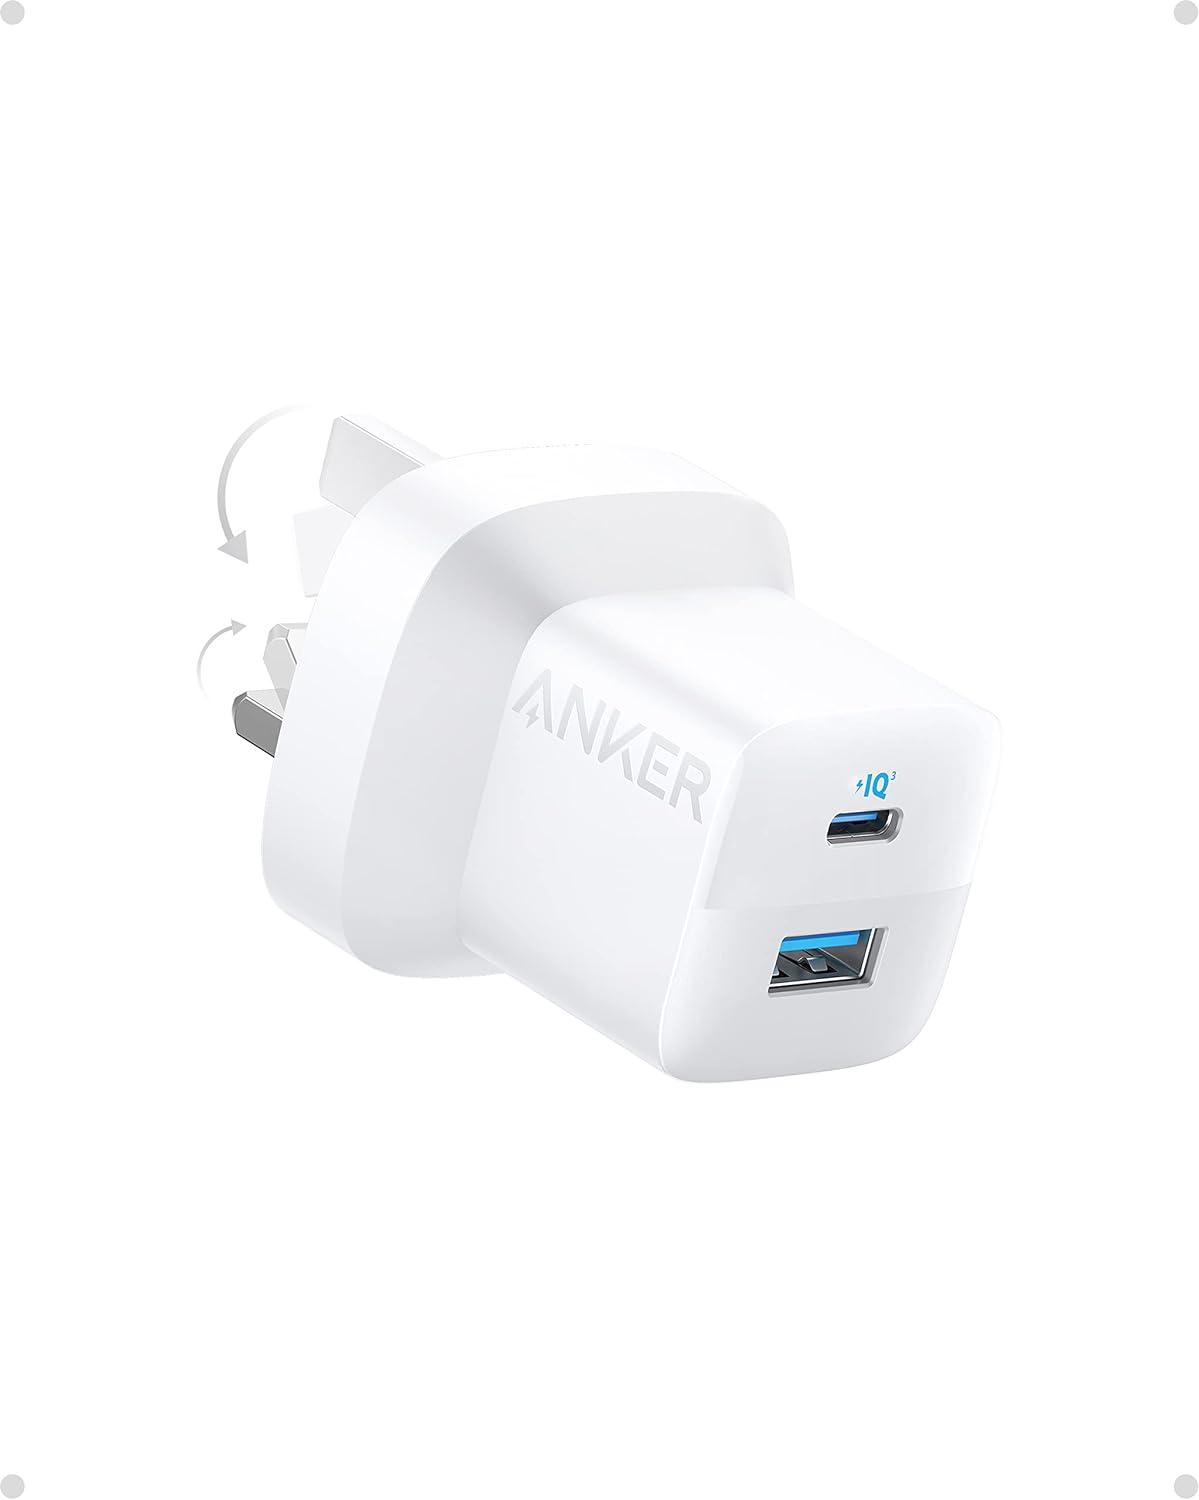 Anker 33W Dual USB C Charger - White